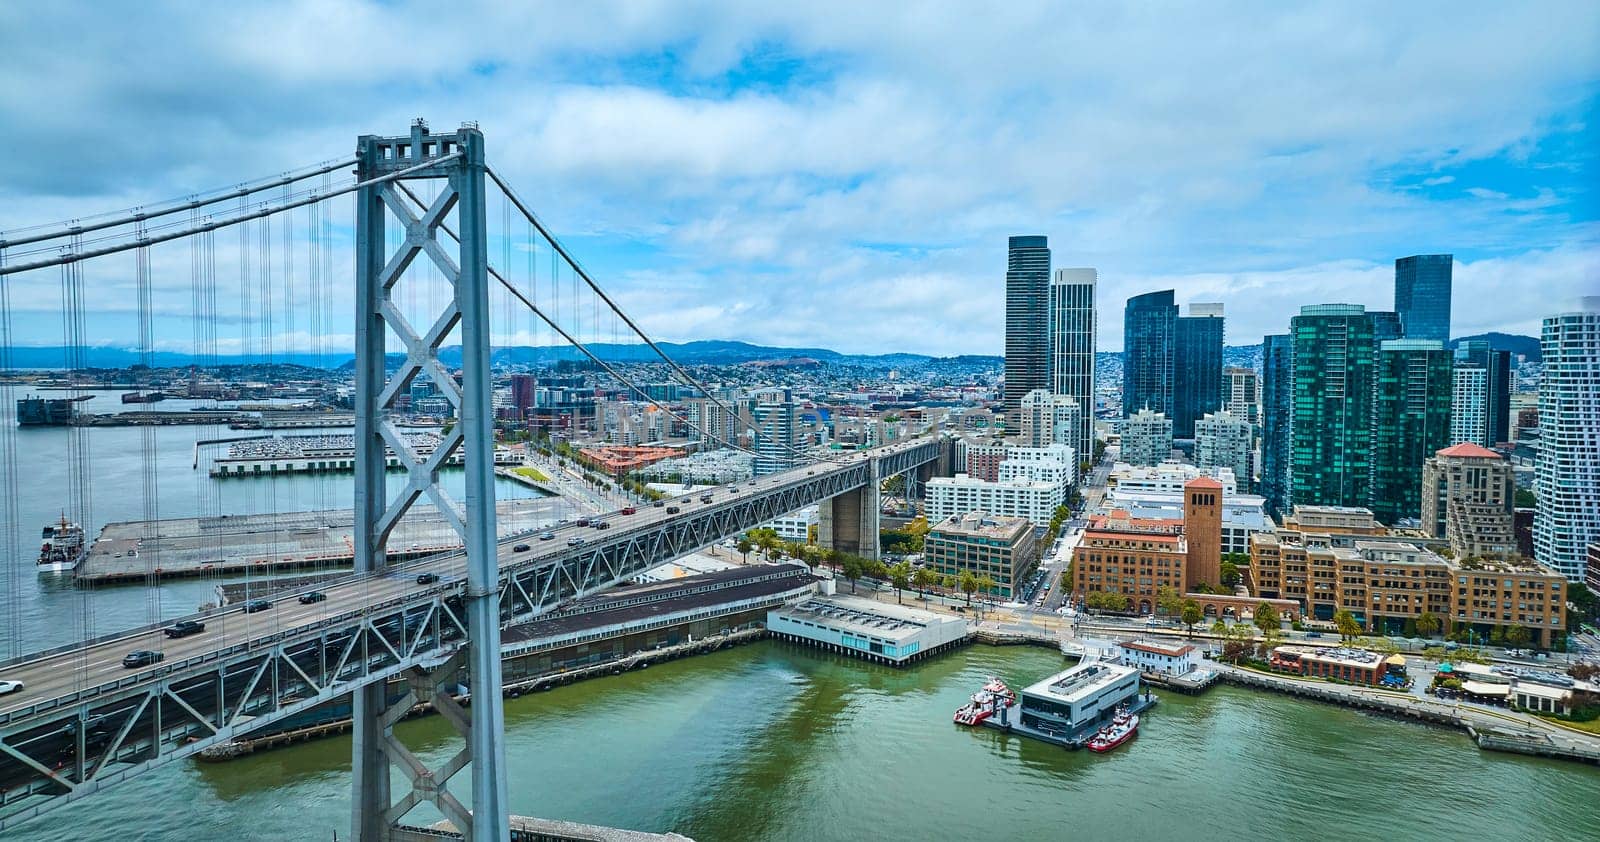 Image of Oakland Bay Bridge aerial with view of city skyscrapers and San Francisco Fire Department Pier